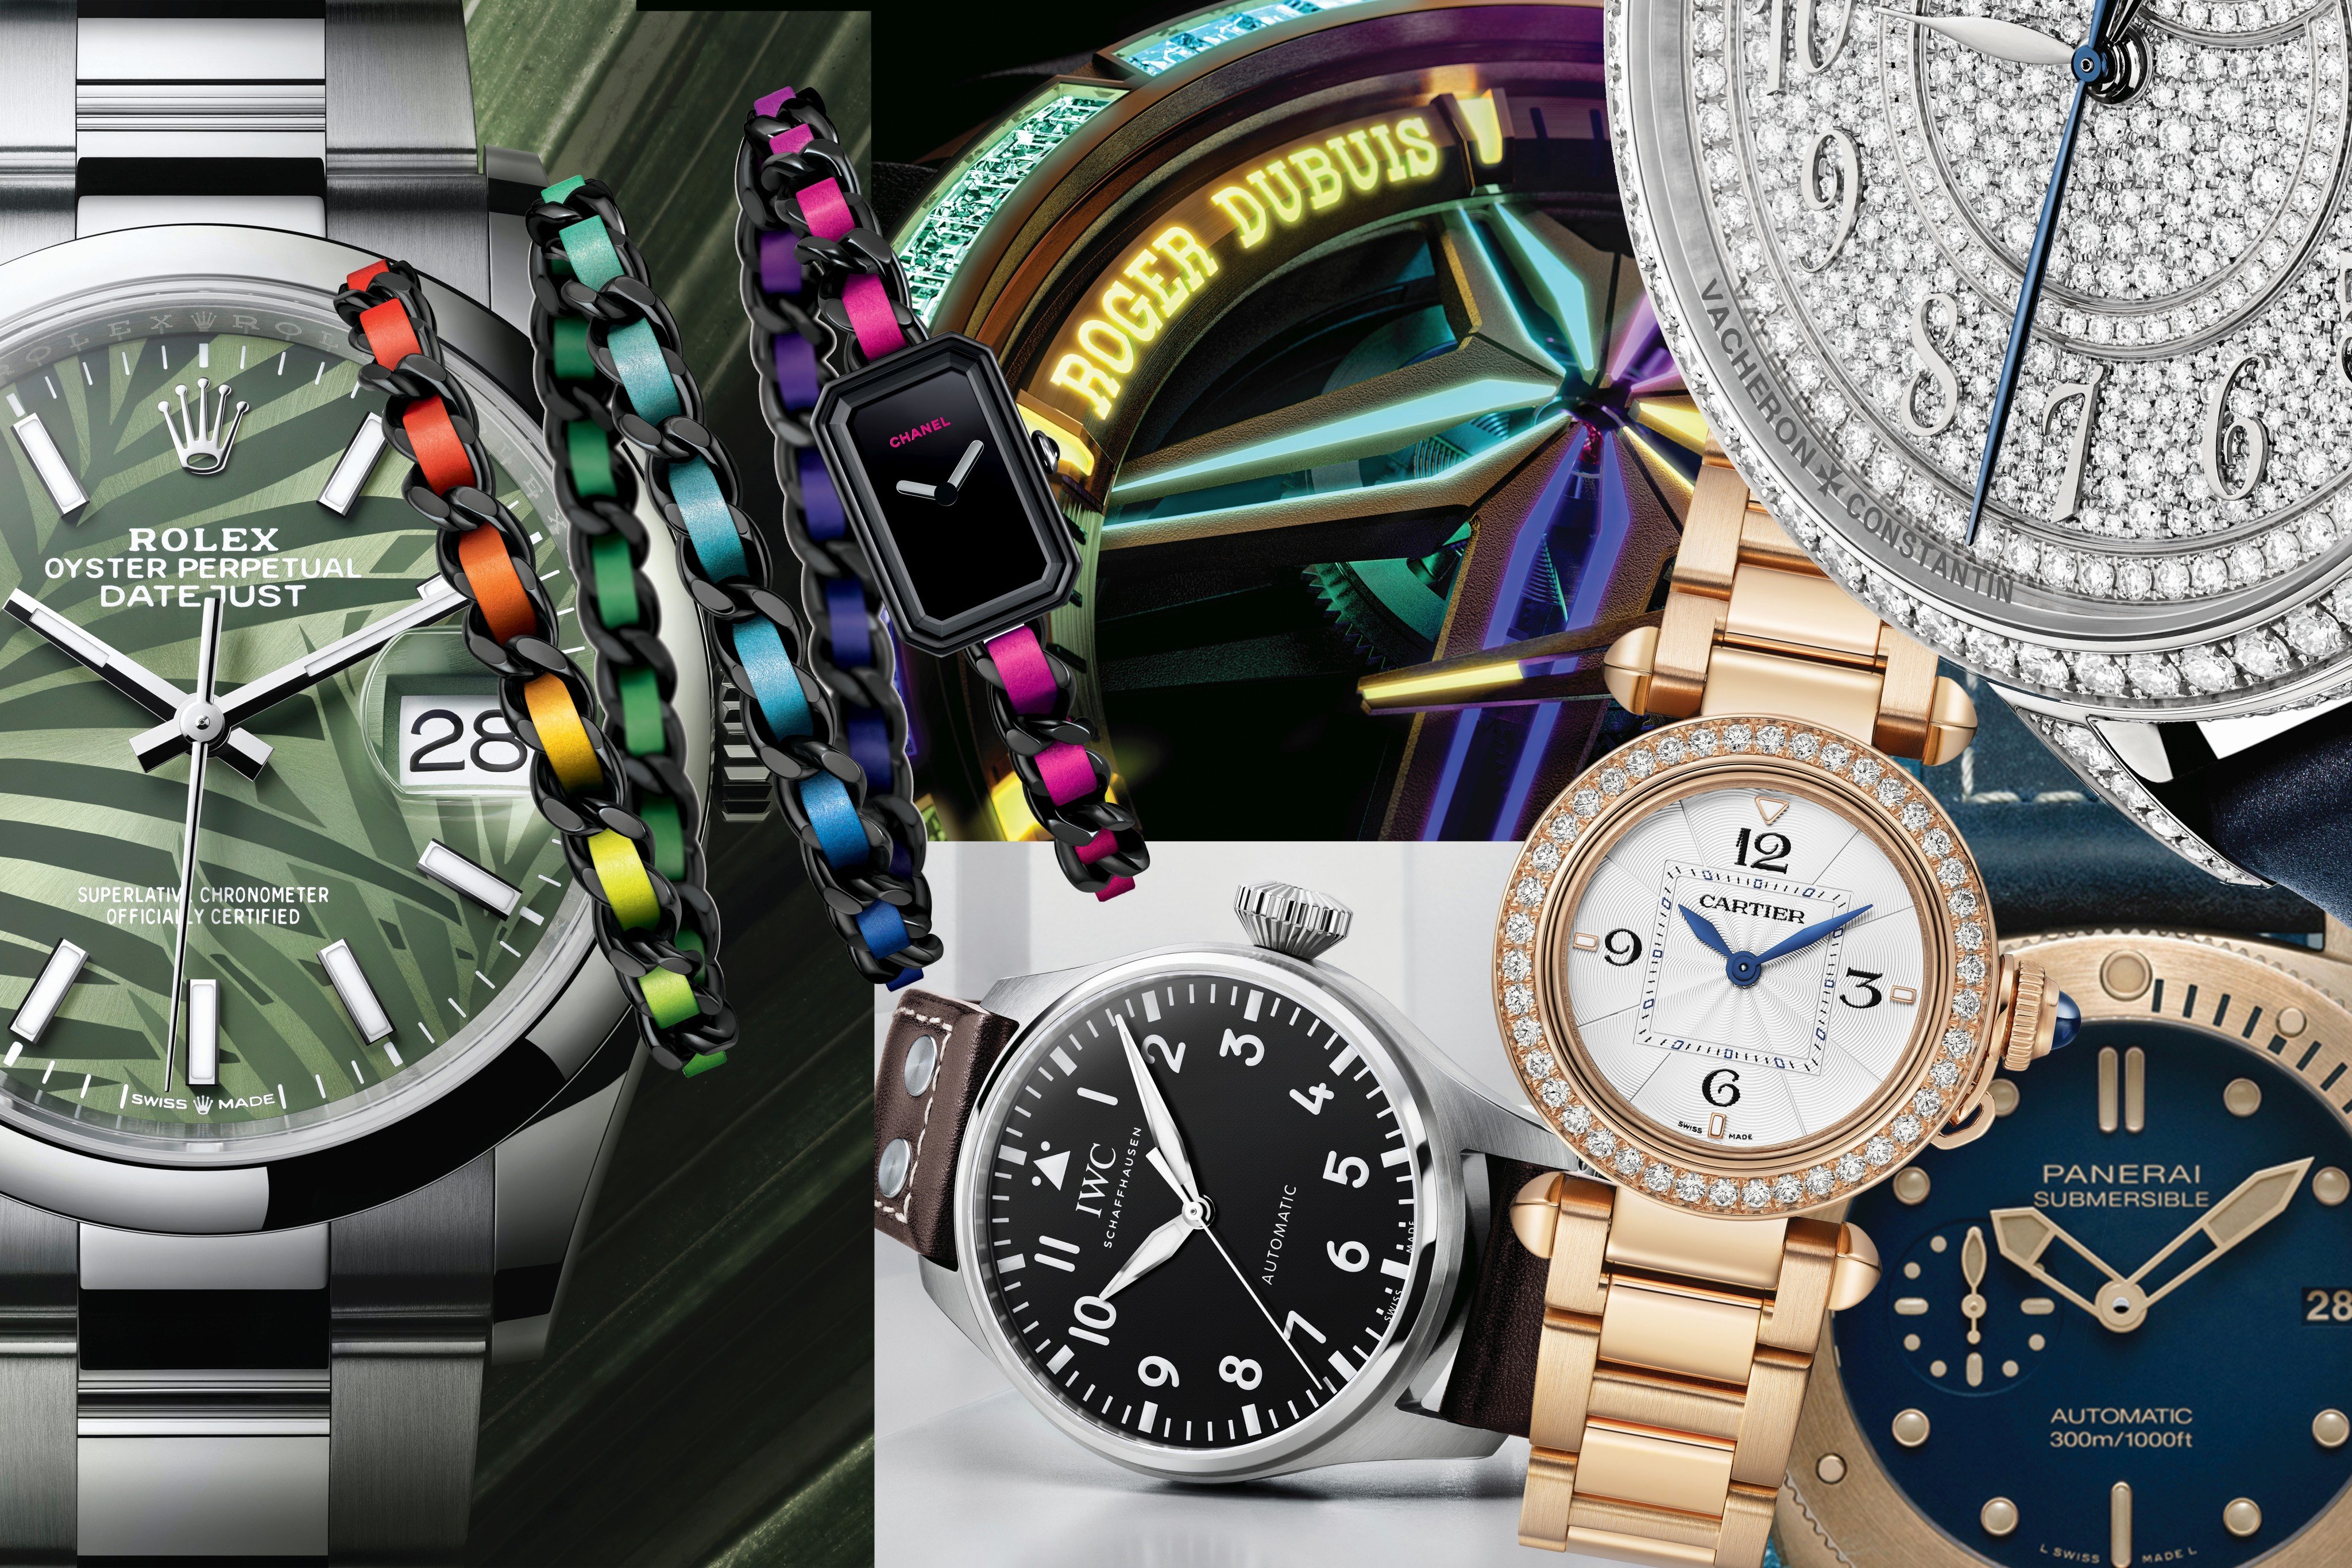 Watches & Wonders Geneva 2021 saw Rolex, Patek Philippe and Tudor all unveil green-tinted models, while Cartier, IWC and Panerai lead the smaller timepiece trend. Photo: Handout